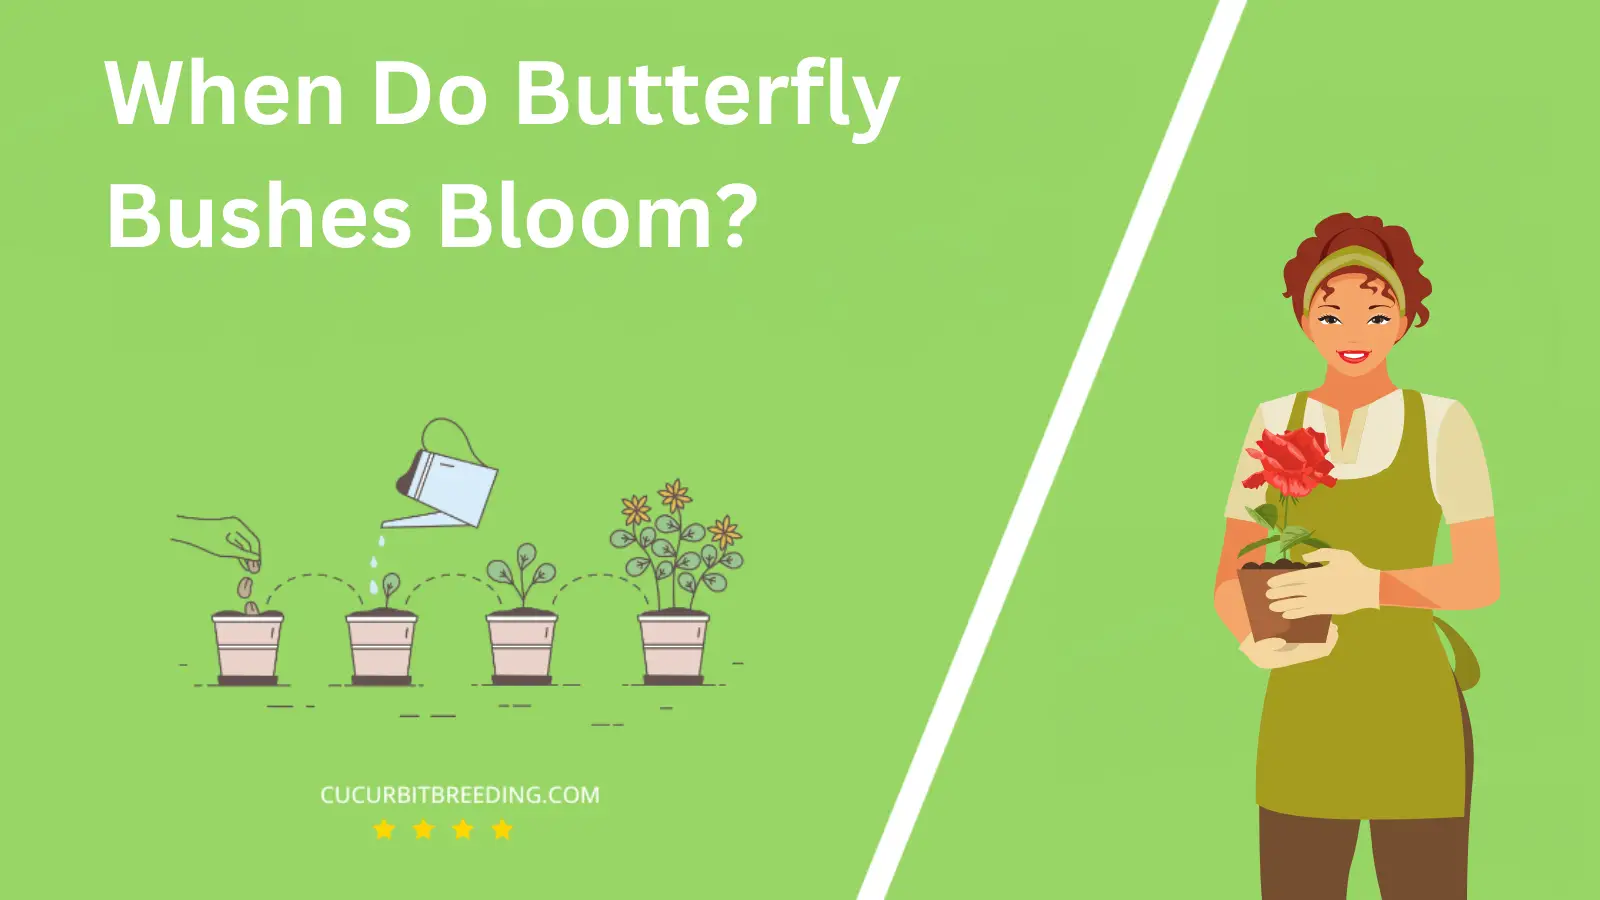 When Do Butterfly Bushes Bloom?